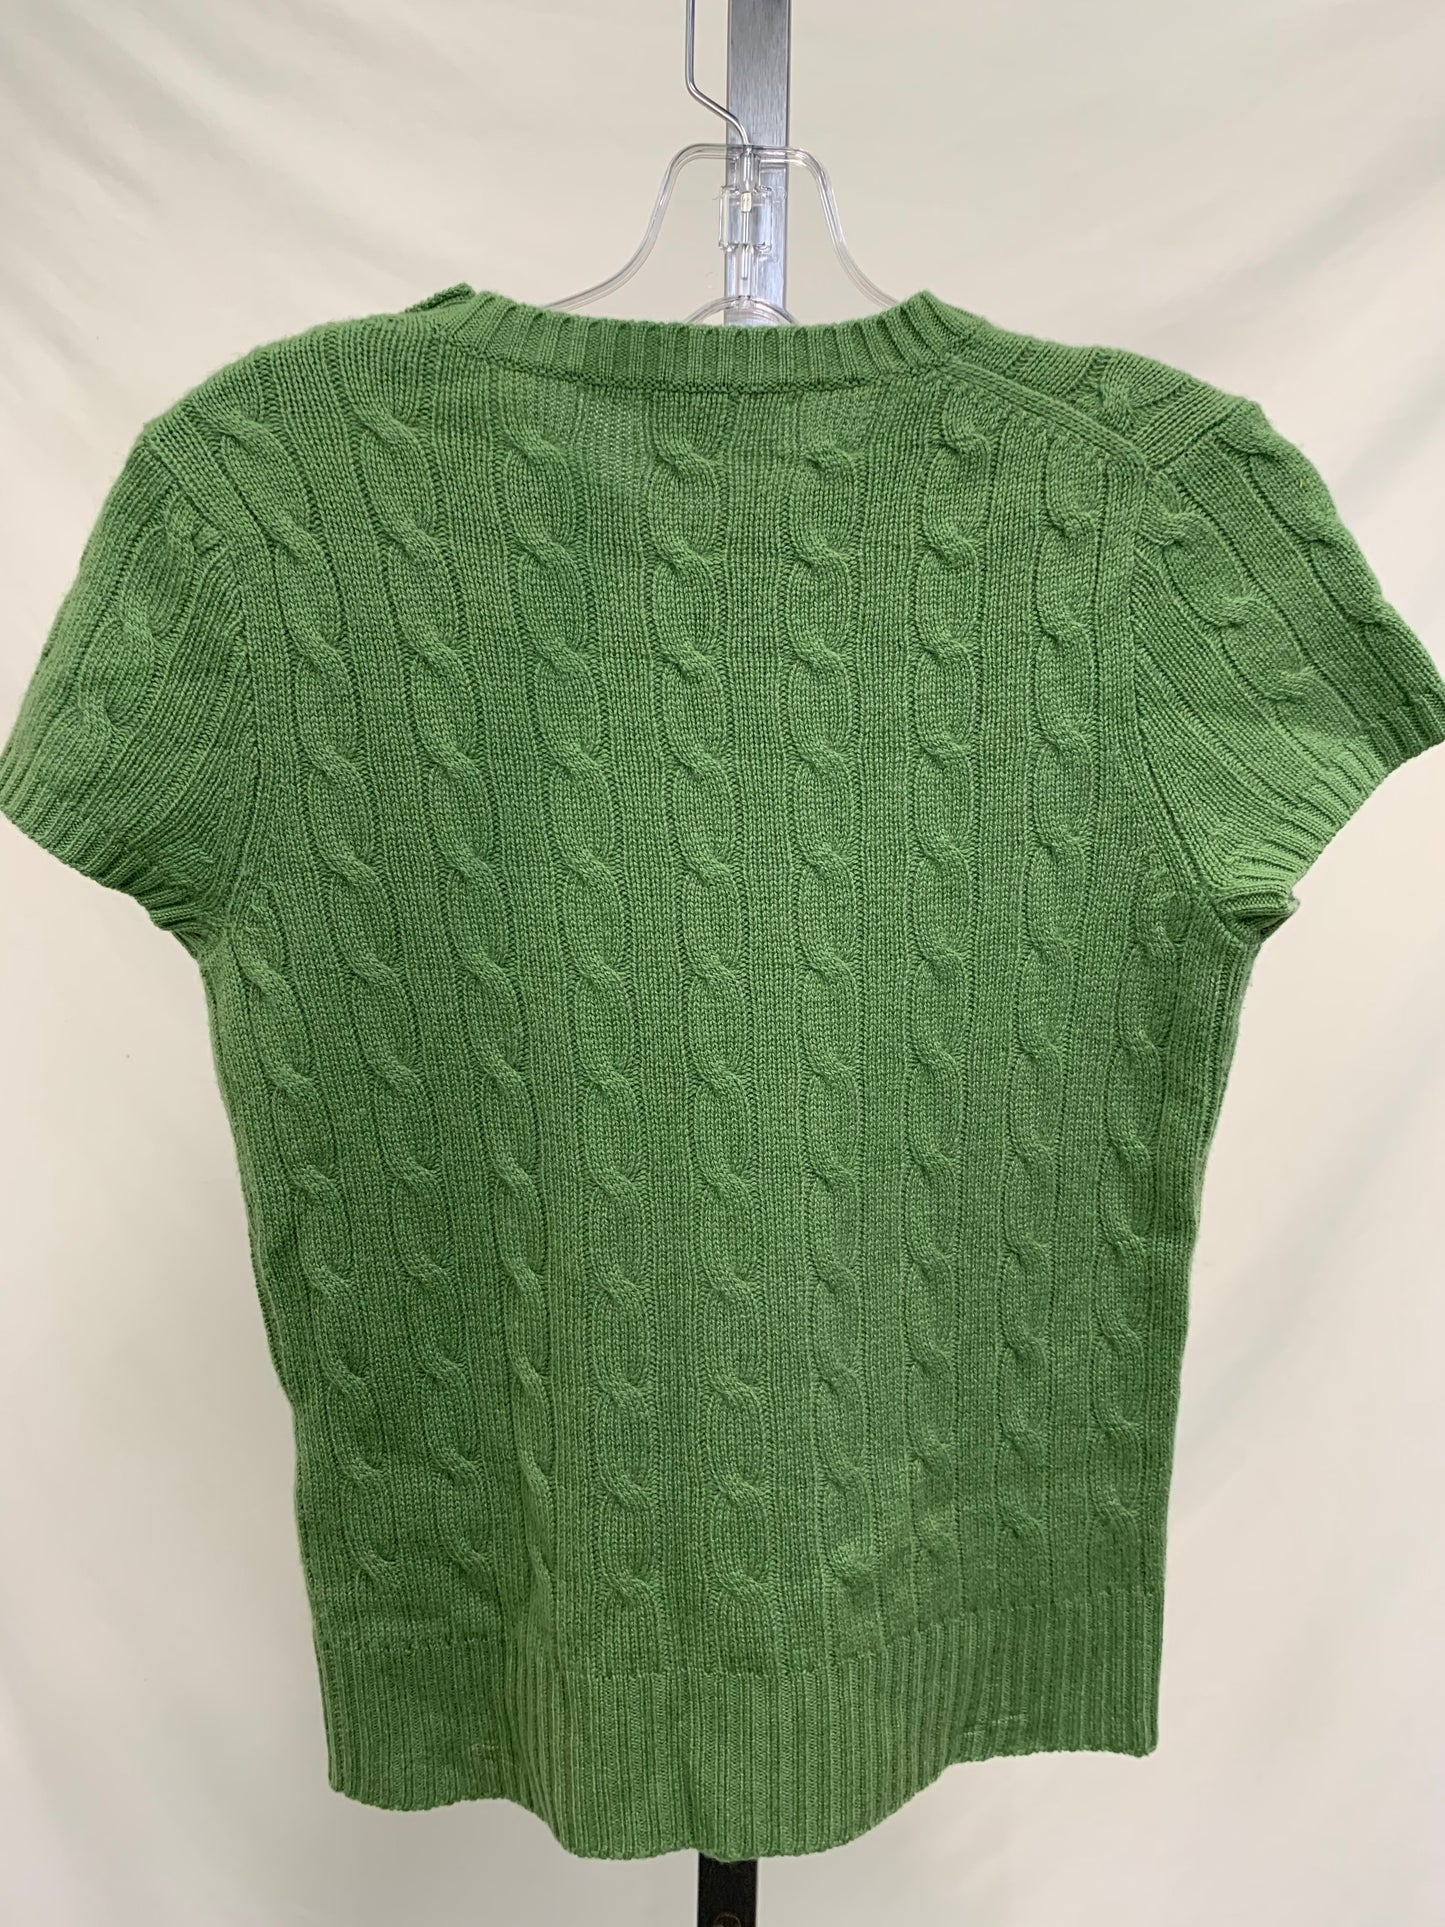 J. Crew Green Cableknit Shell - Size S